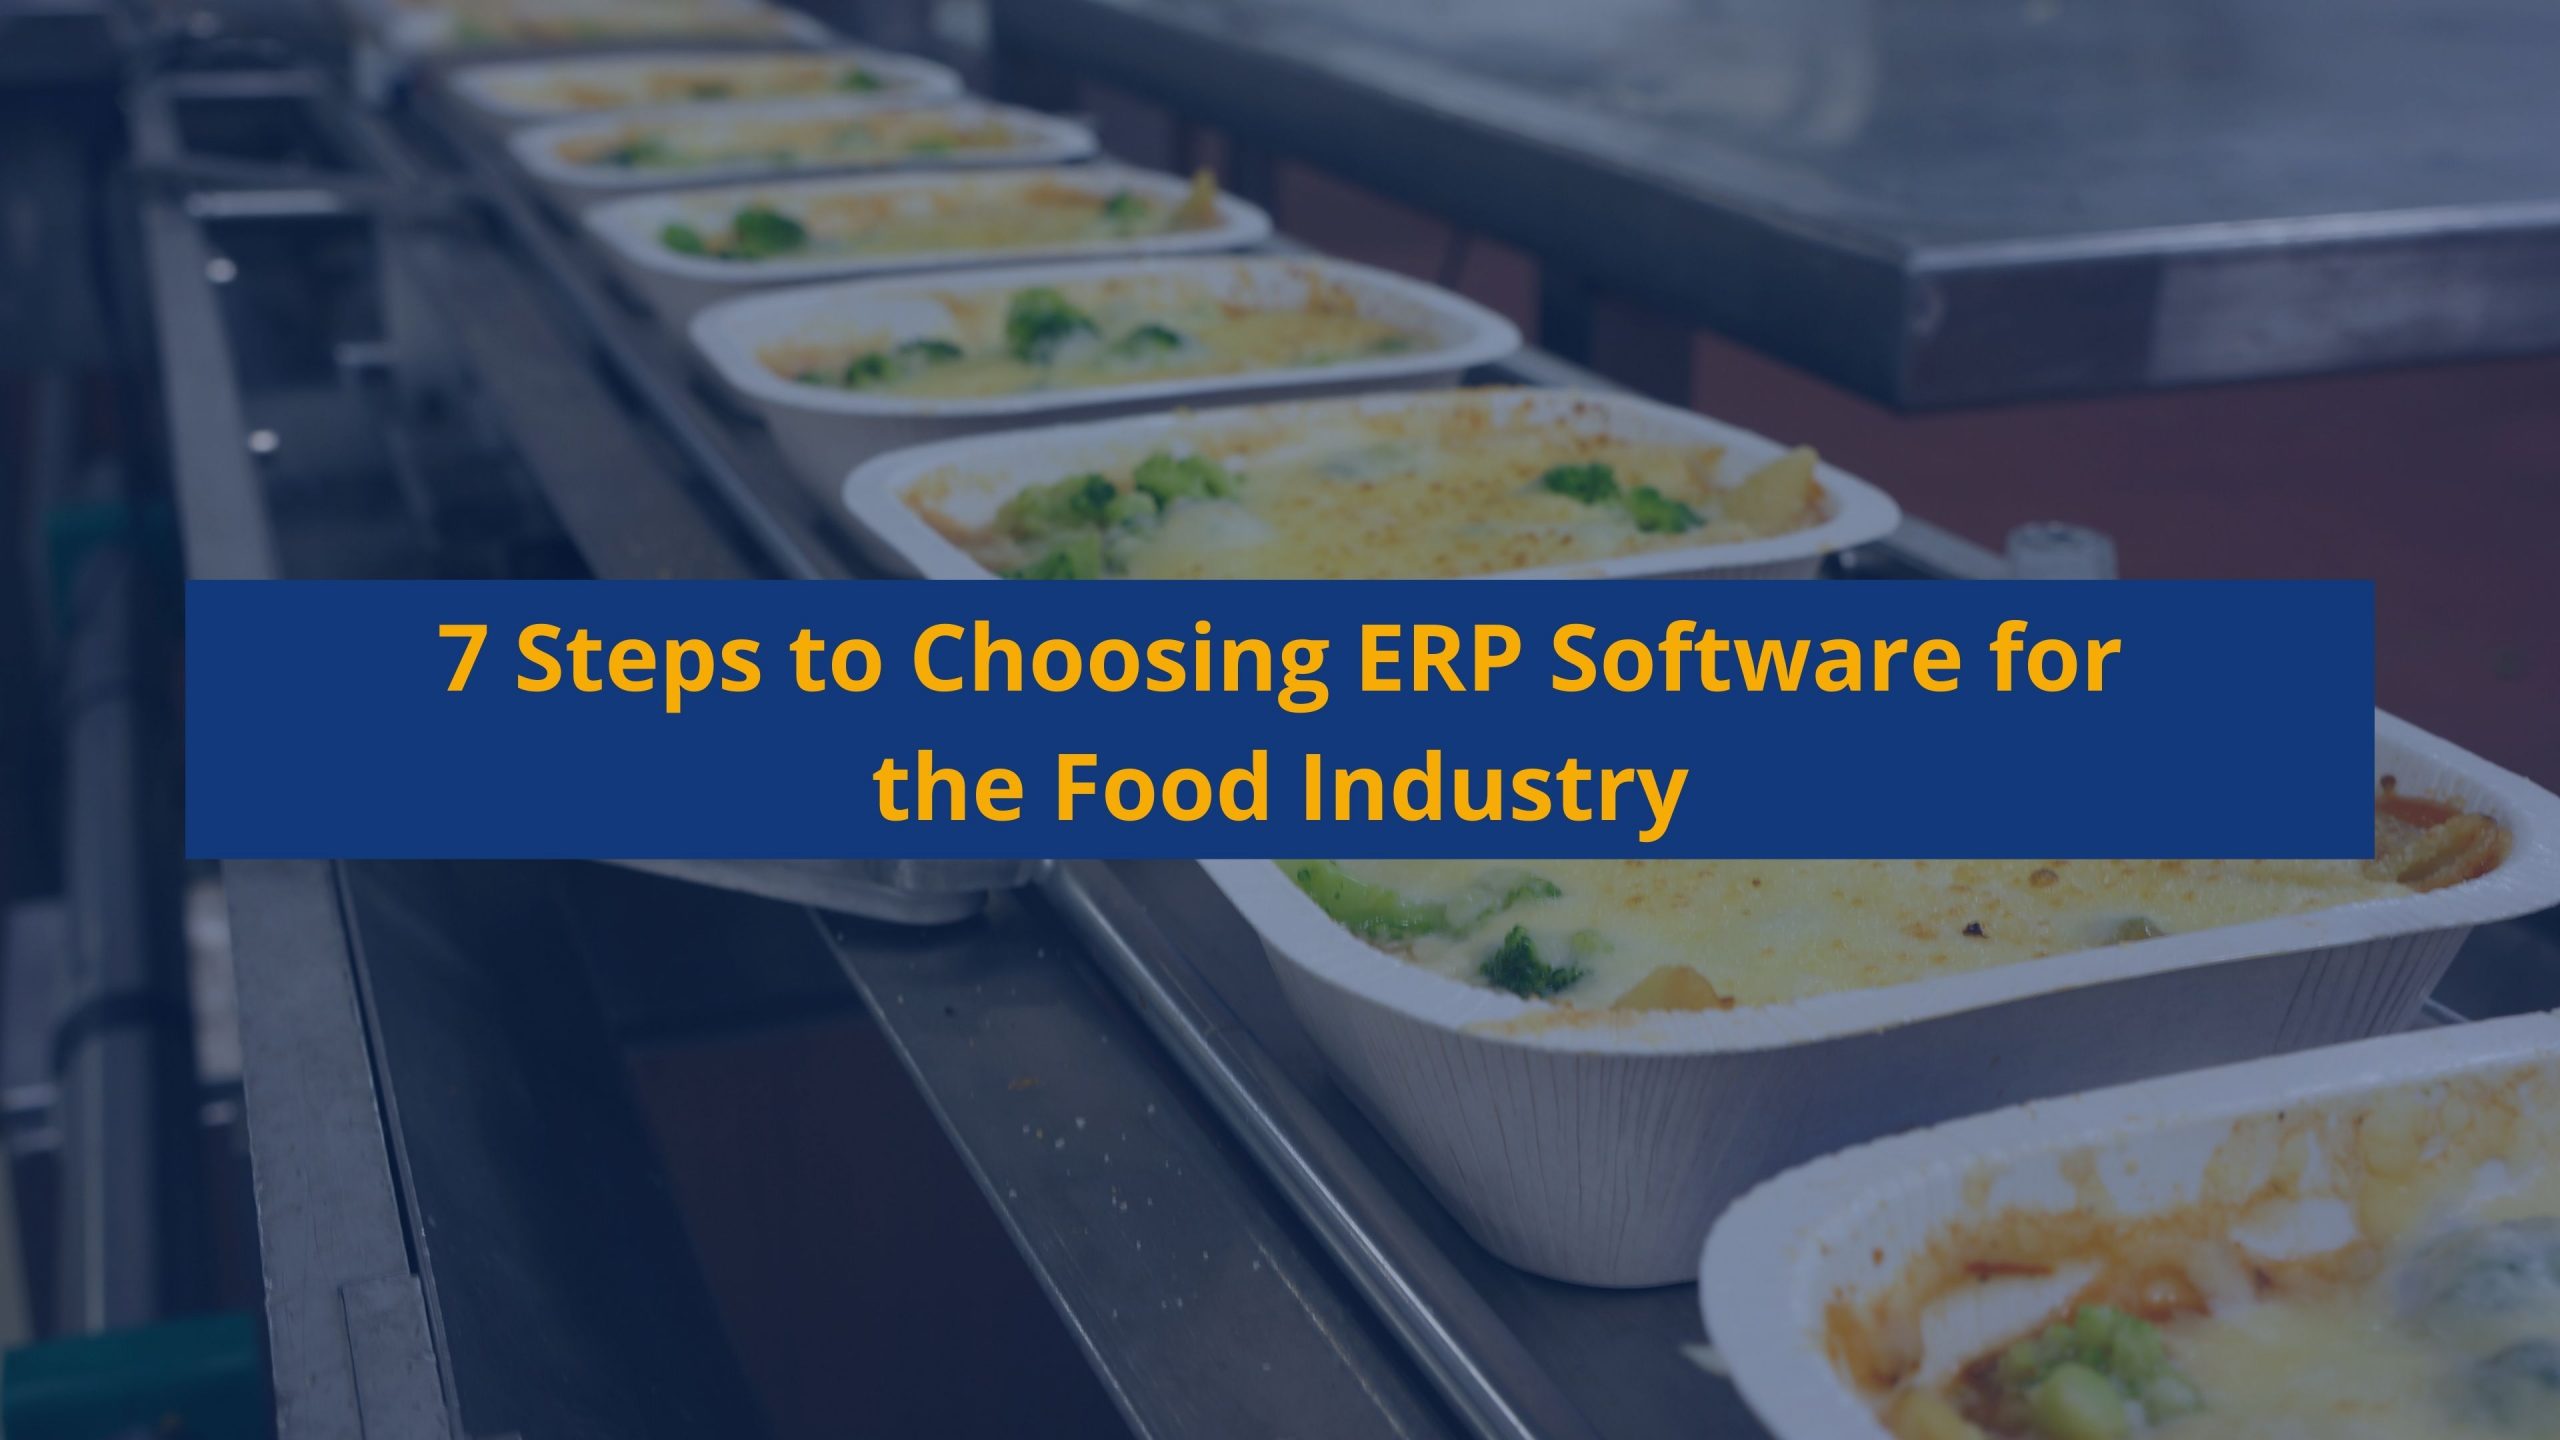 7 Steps to Choosing ERP Software for the Food Industry